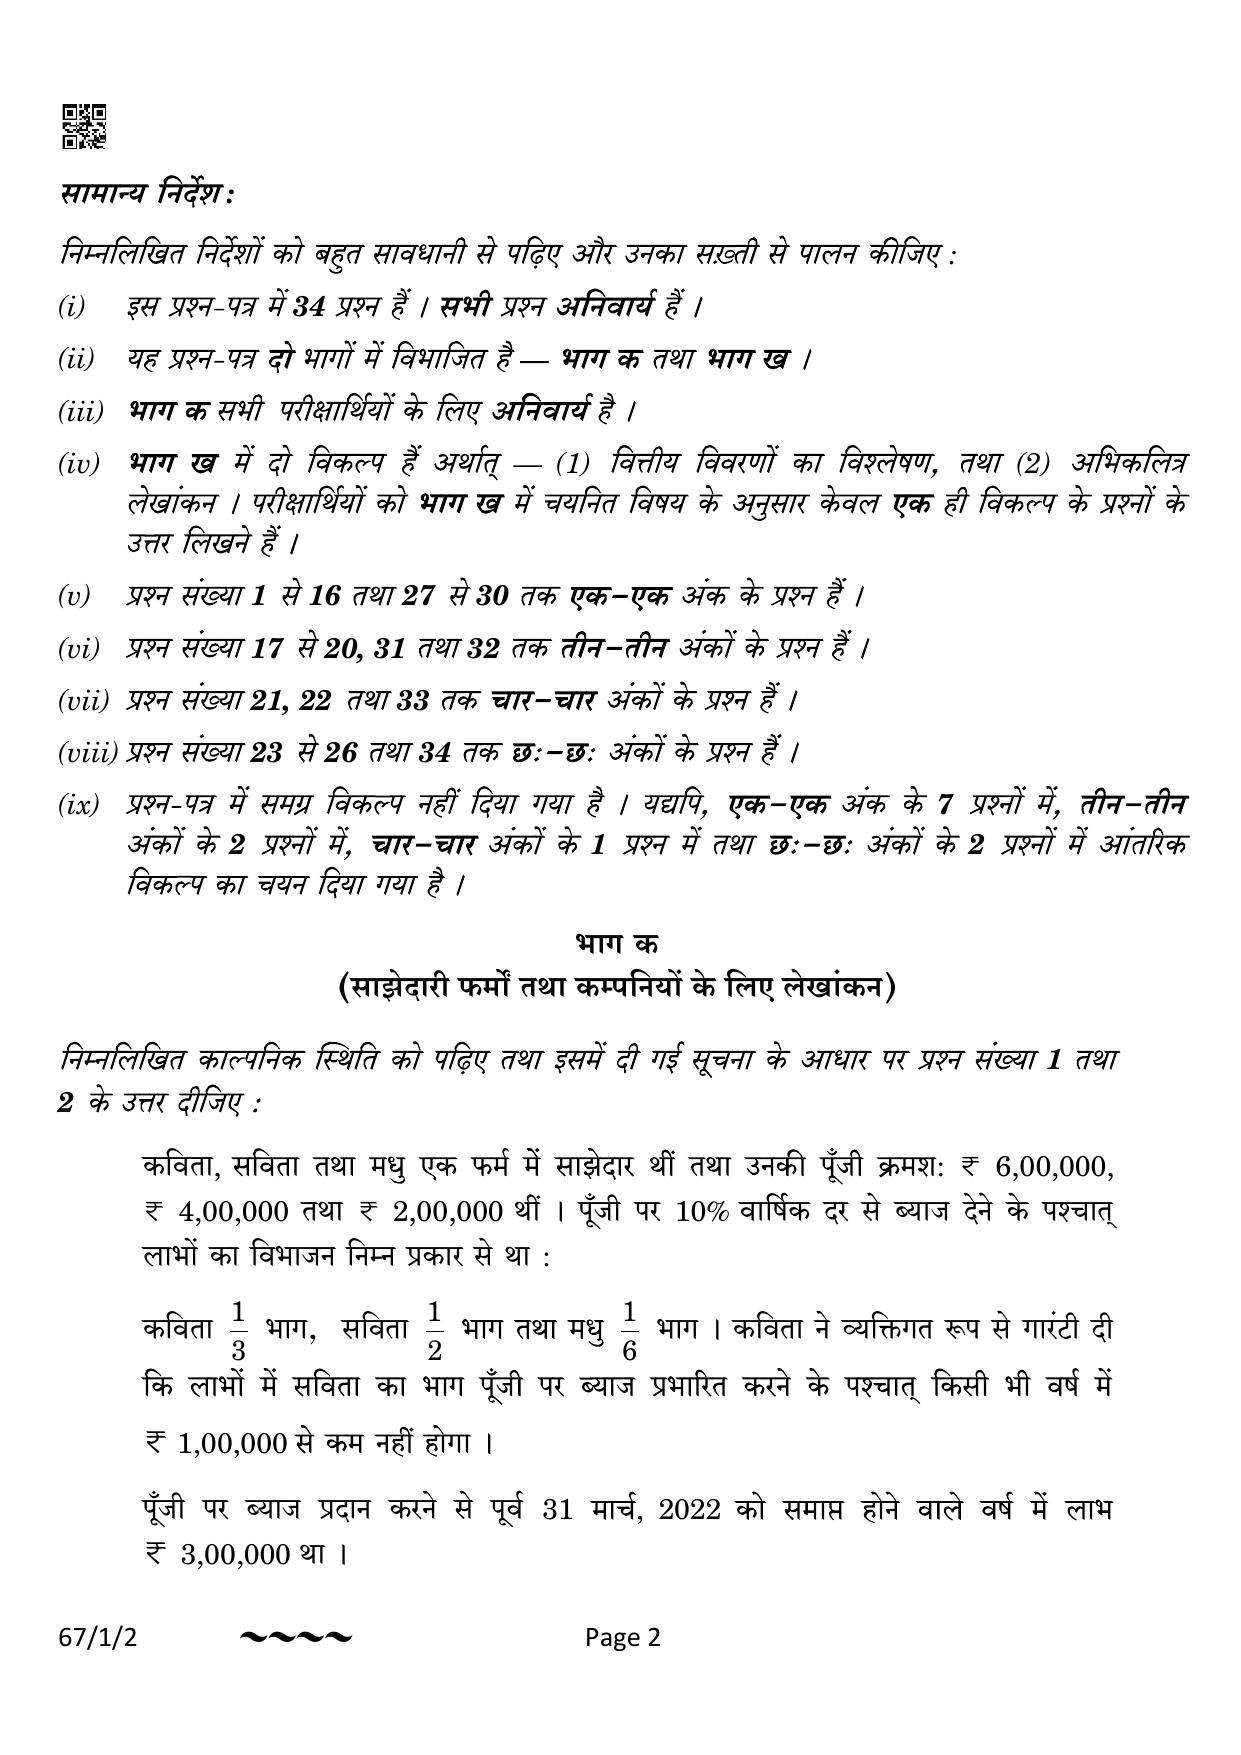 CBSE Class 12 67-1-2 Accountancy 2023 Question Paper - Page 2